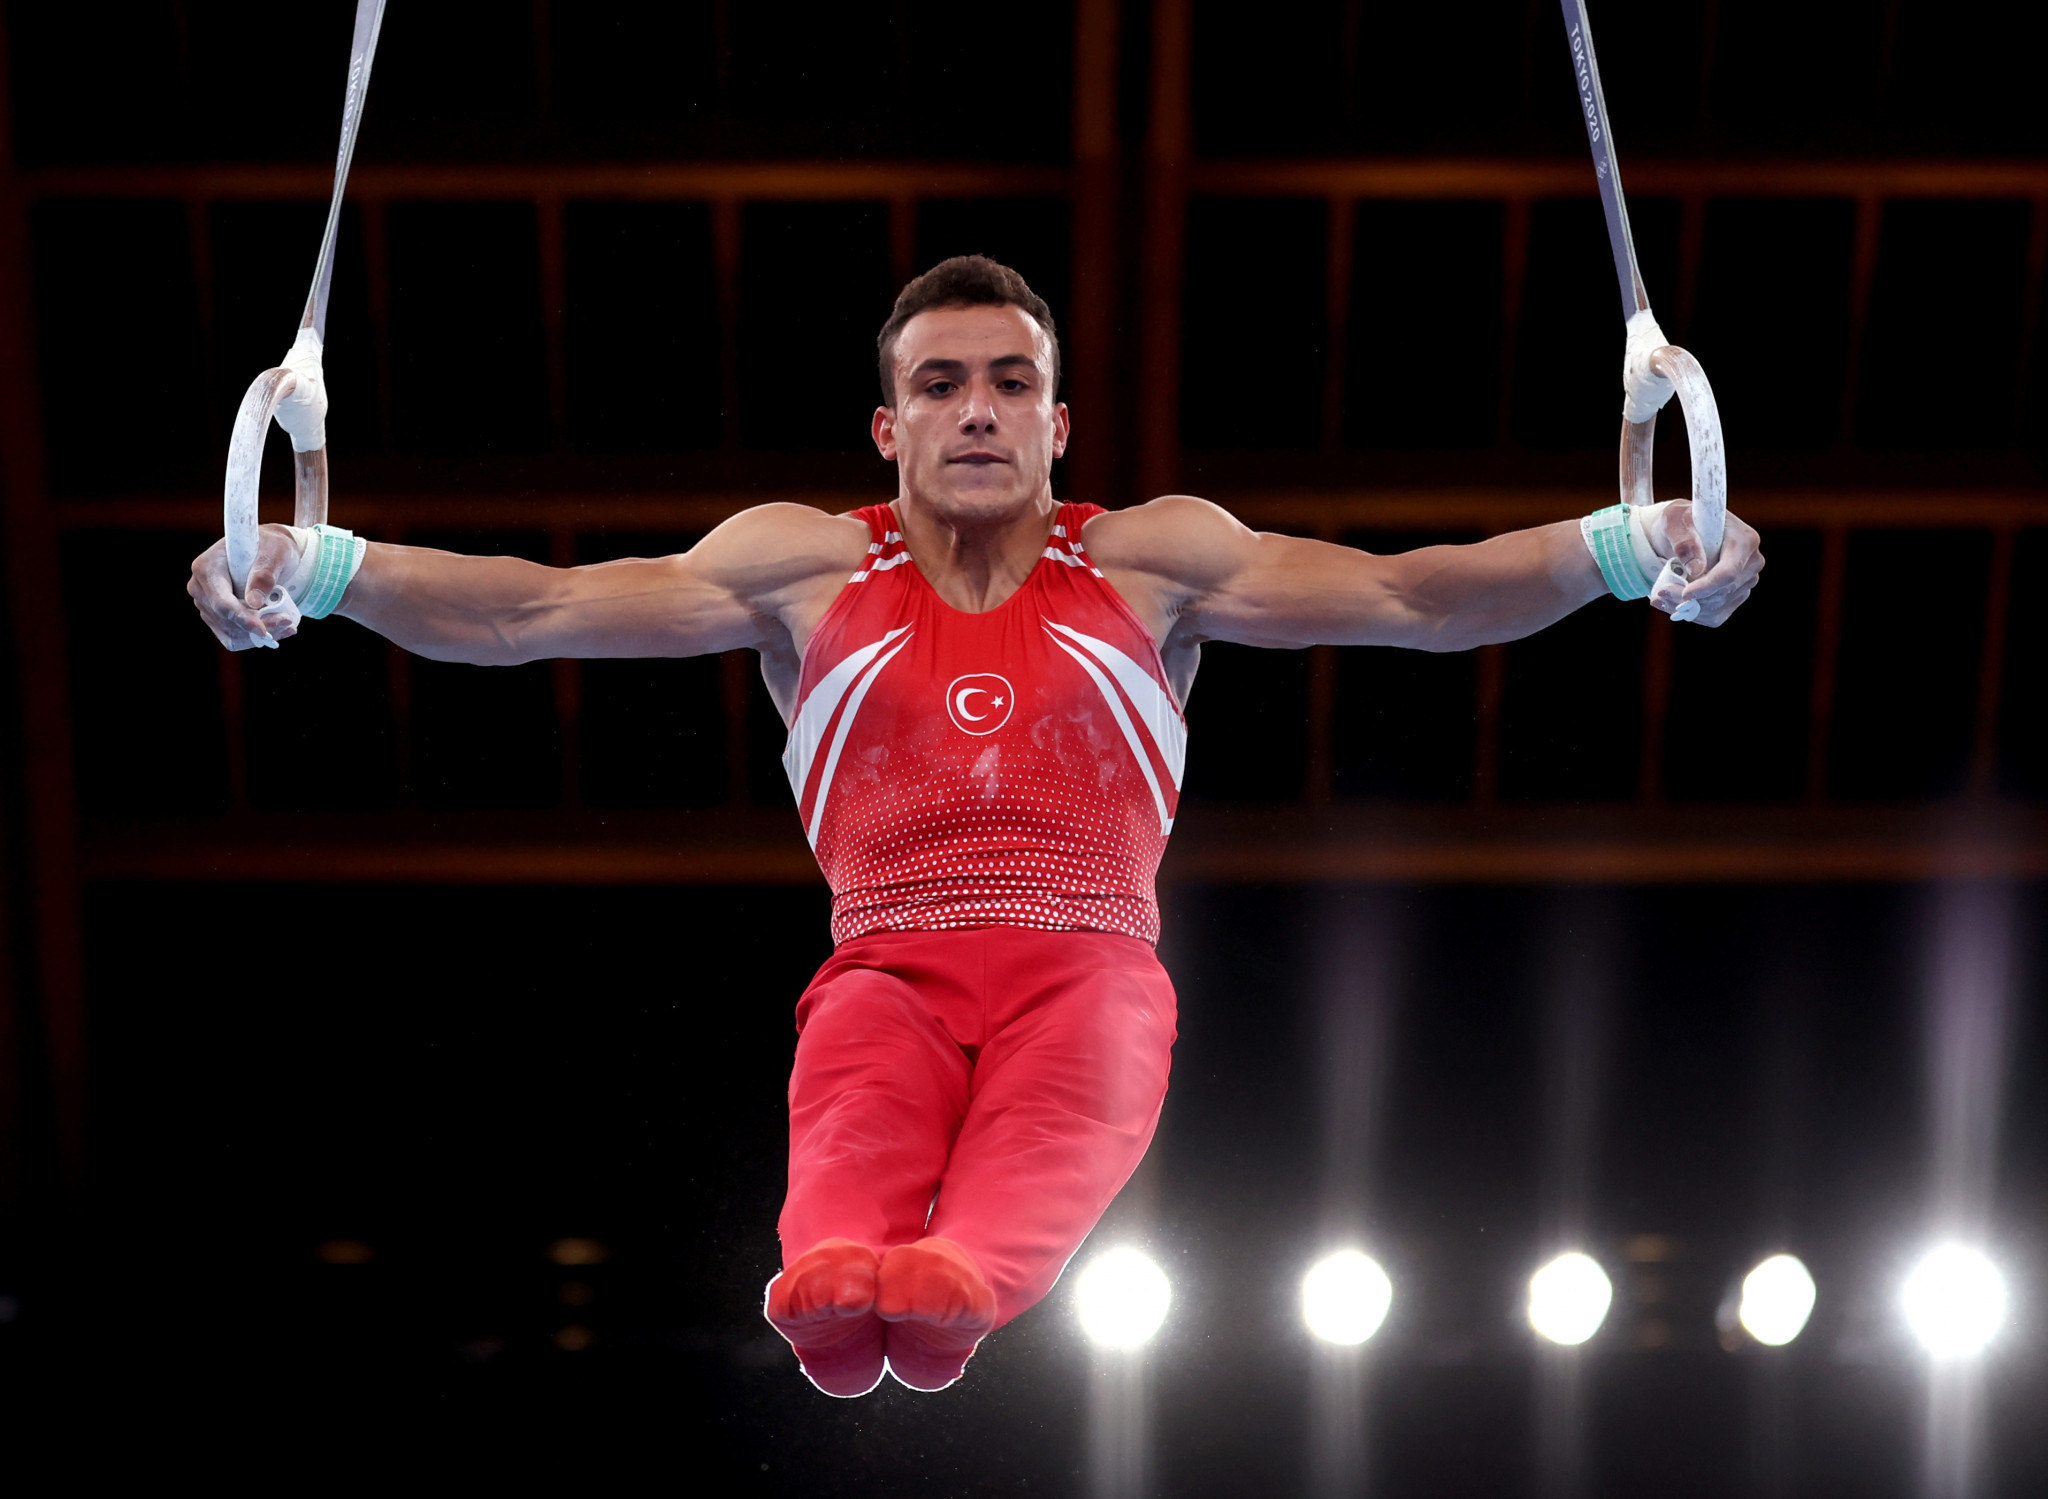 A field-leading rings score helped Adem Asil win Oran 2022 men's all-around gold ©Getty Images